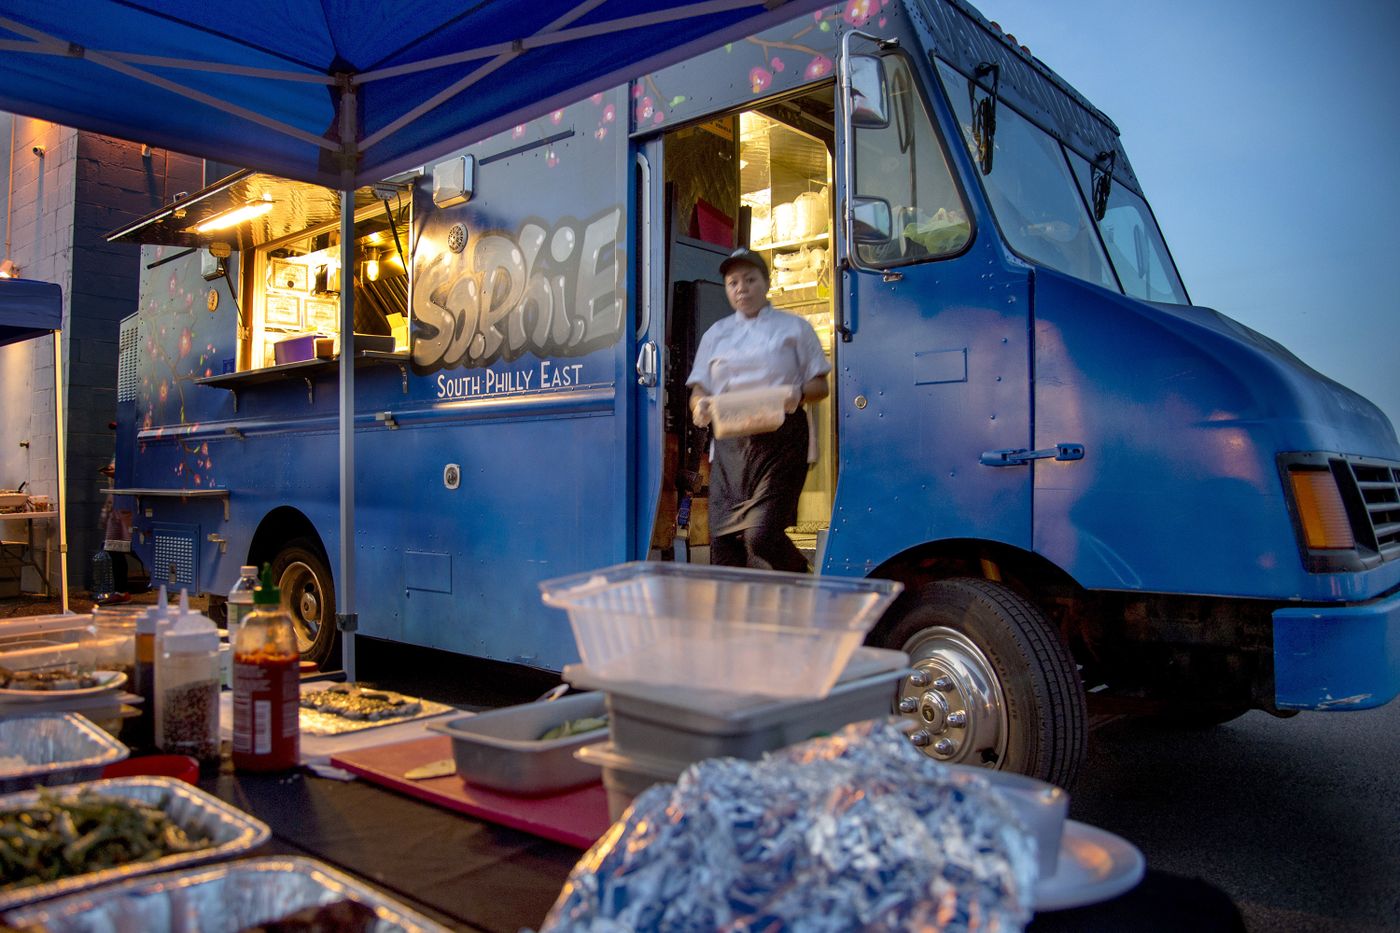 Food truck entrepreneurs work to rescue a South Philly park